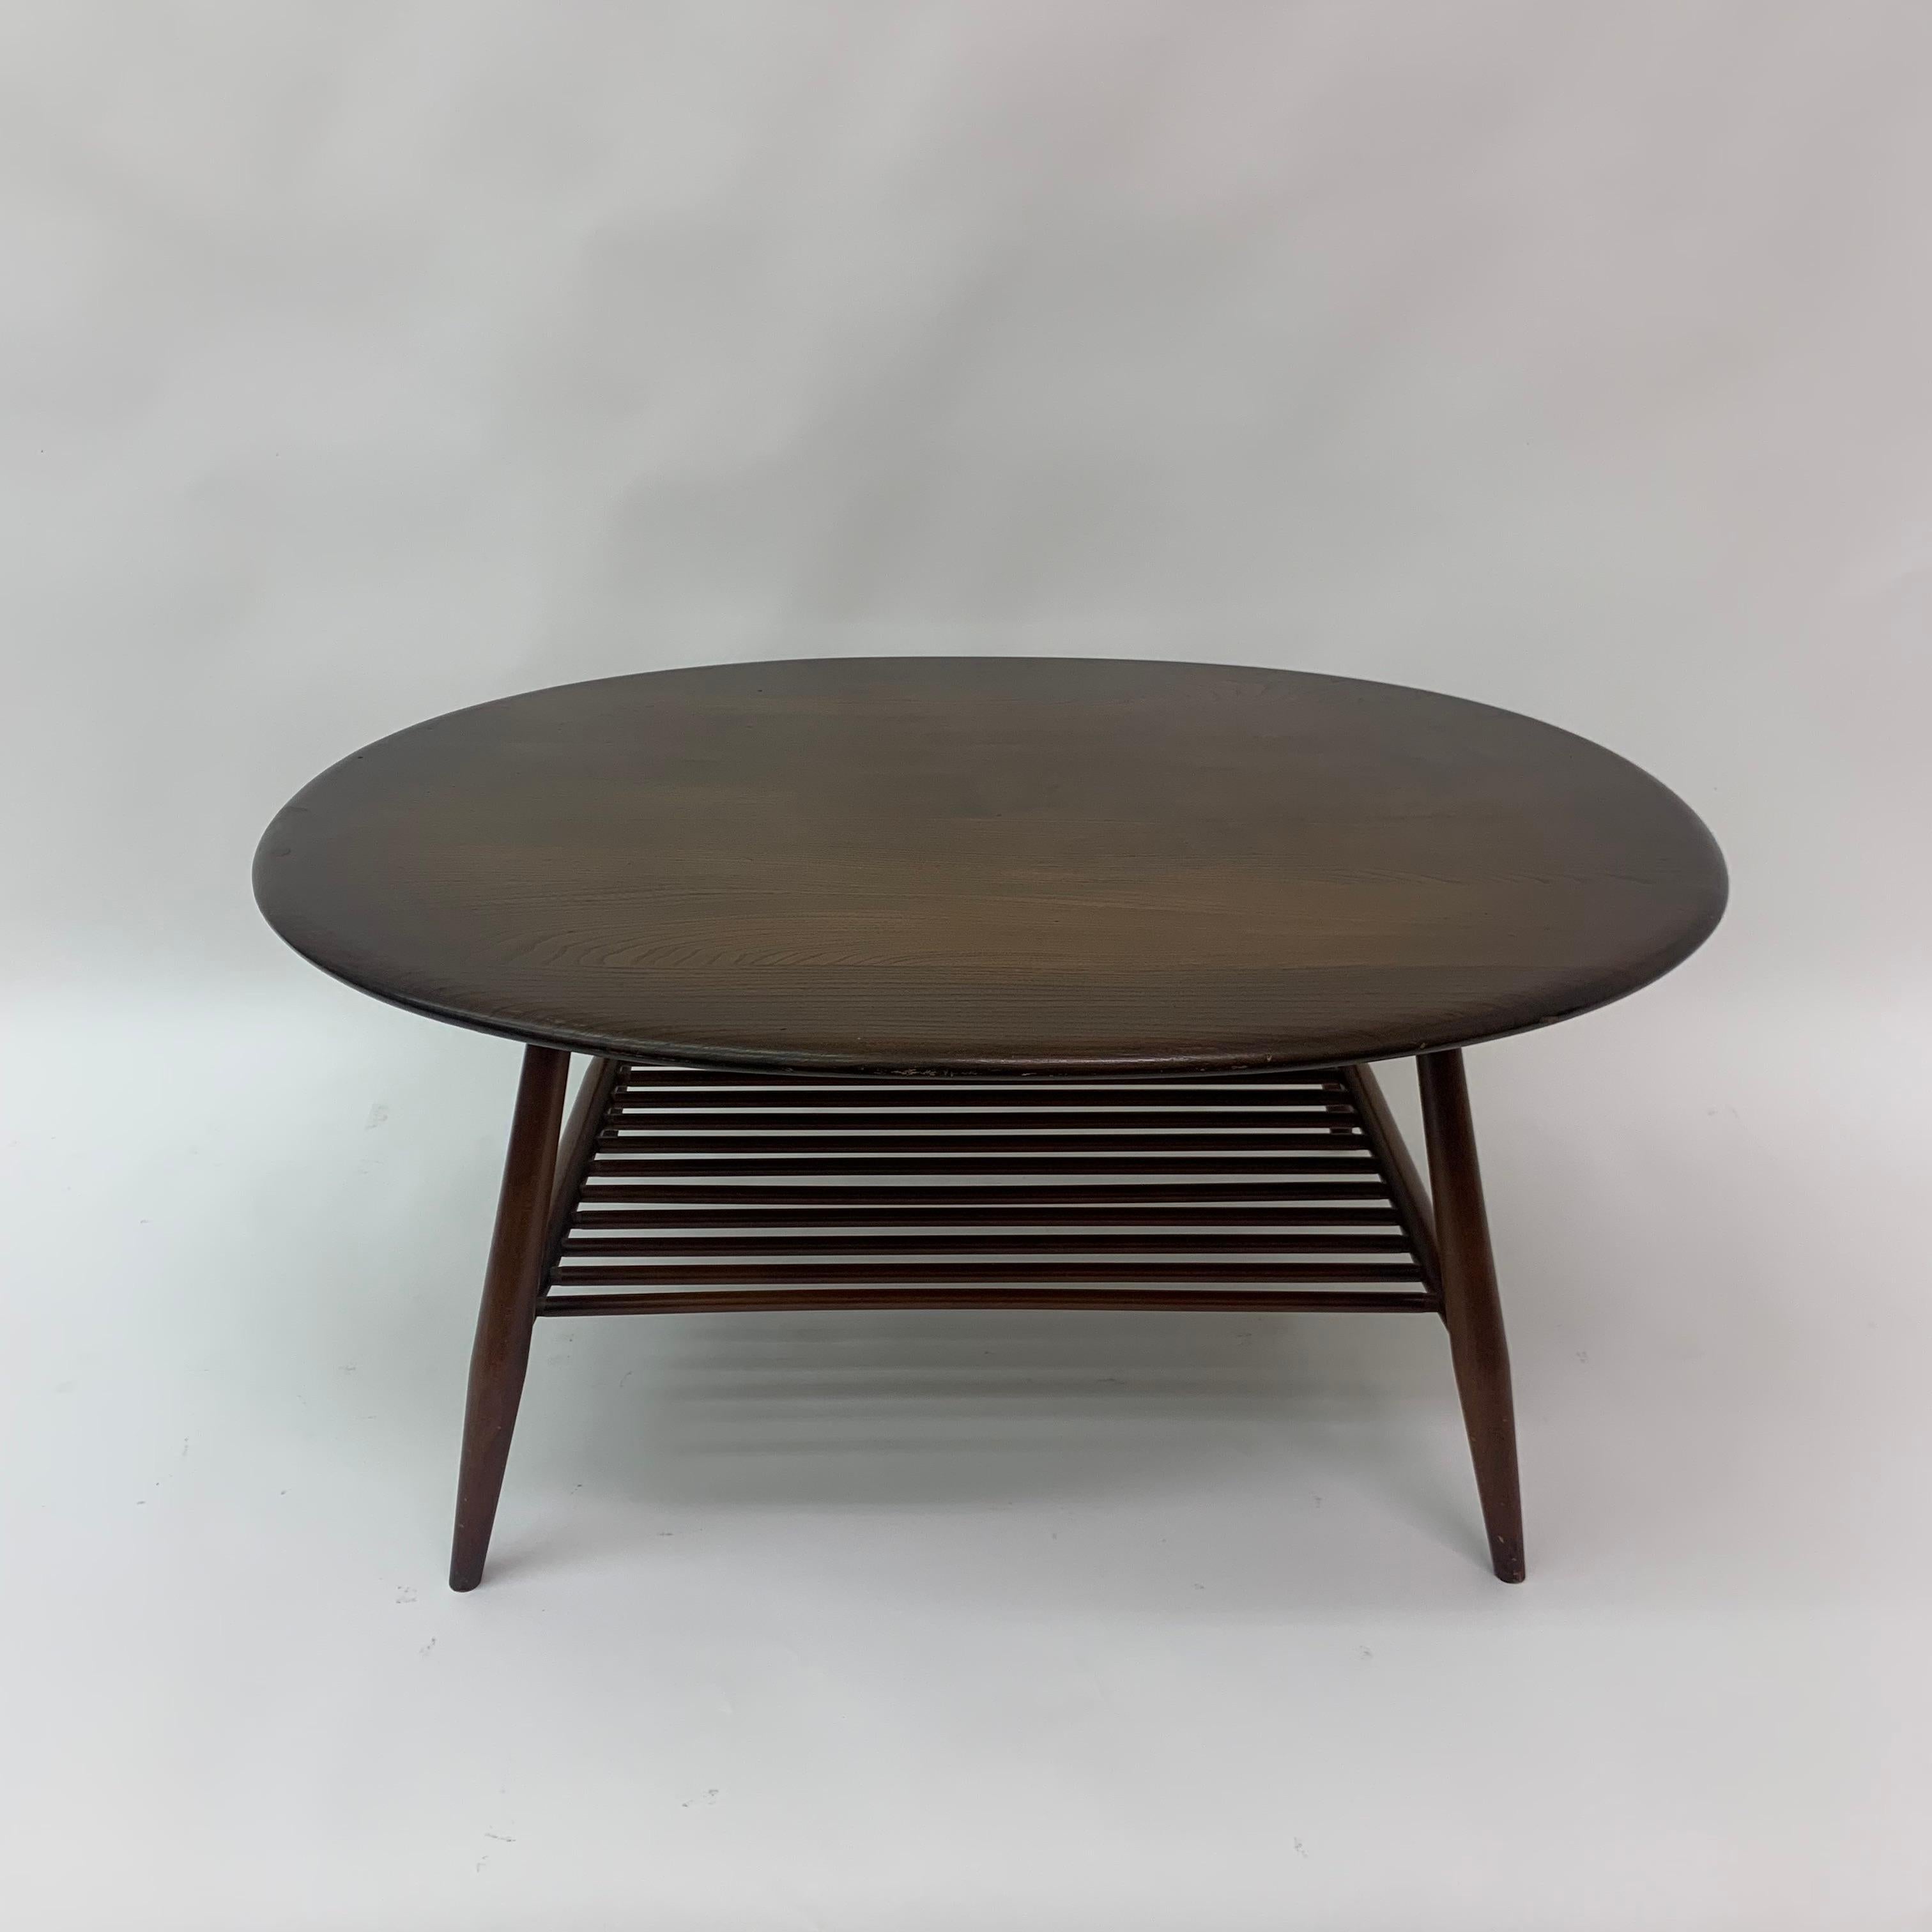 Mid-20th Century Large Oval Coffee Table by Lucian Randolph Ercolani for Ercol, England, 1950s